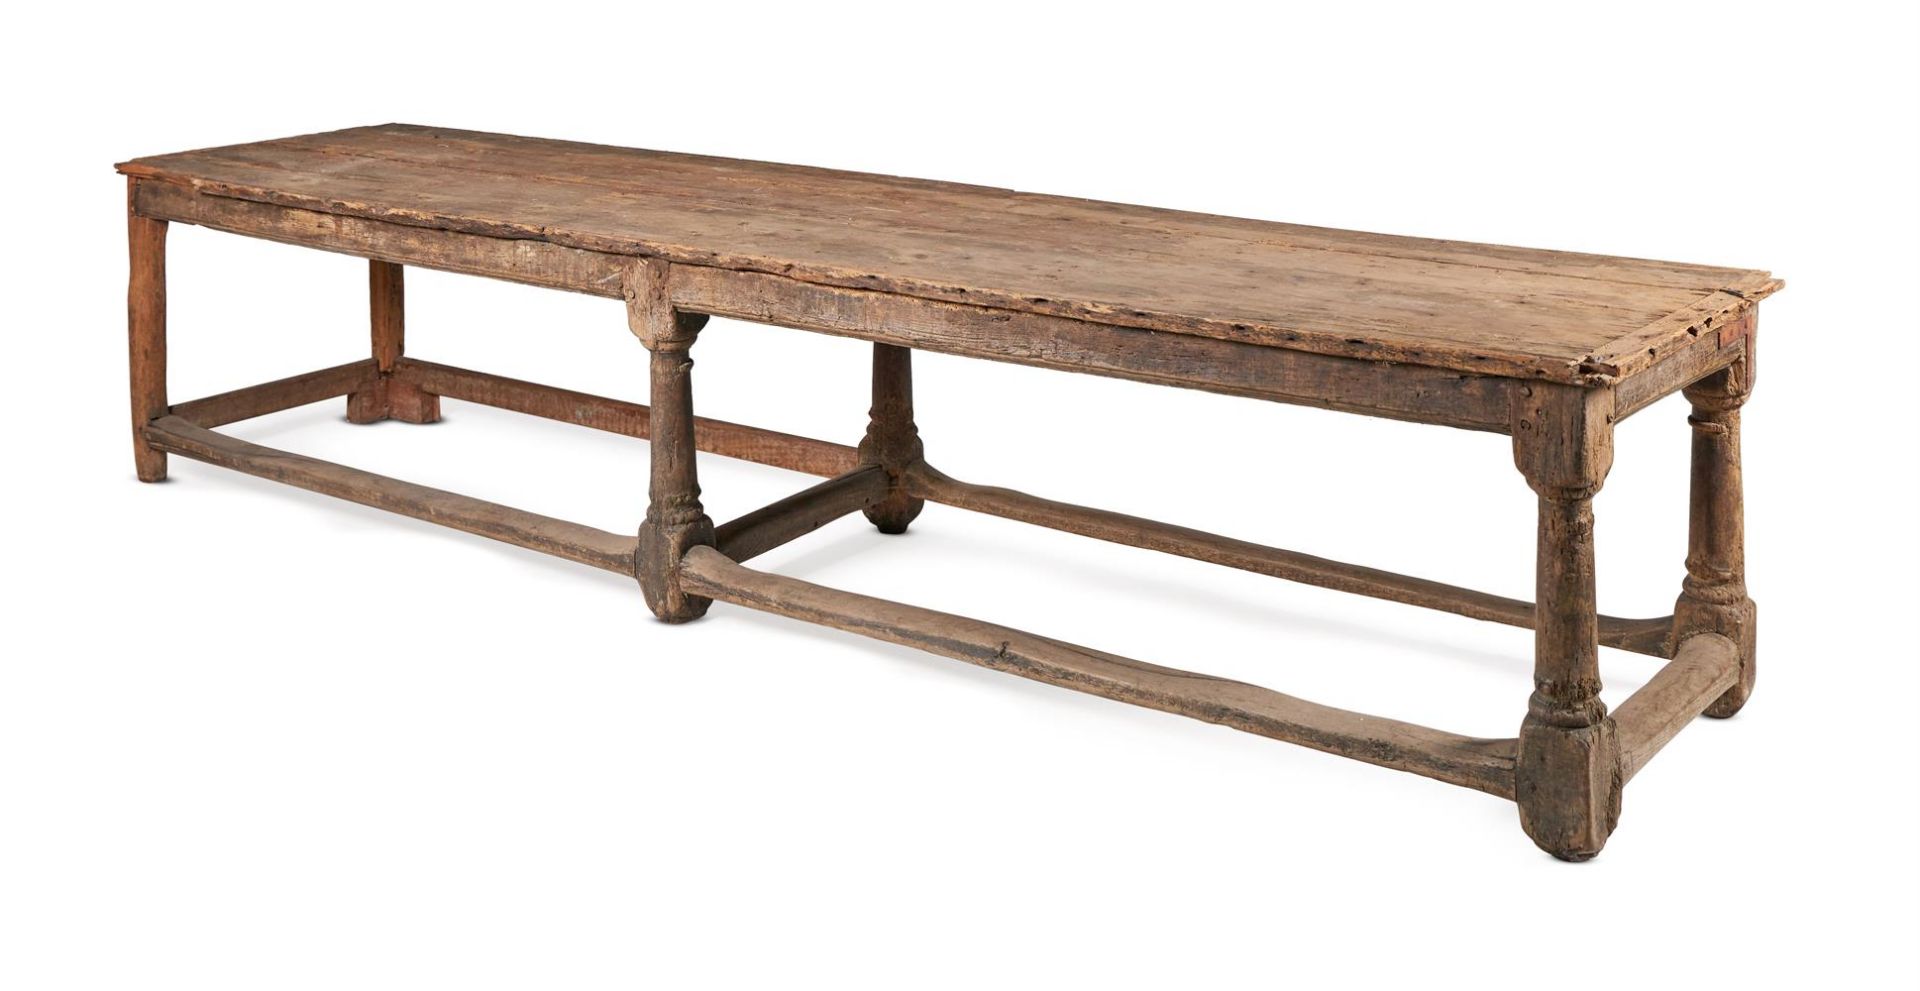 A PINE REFECTORY TABLE, 17TH CENTURY - Image 2 of 3